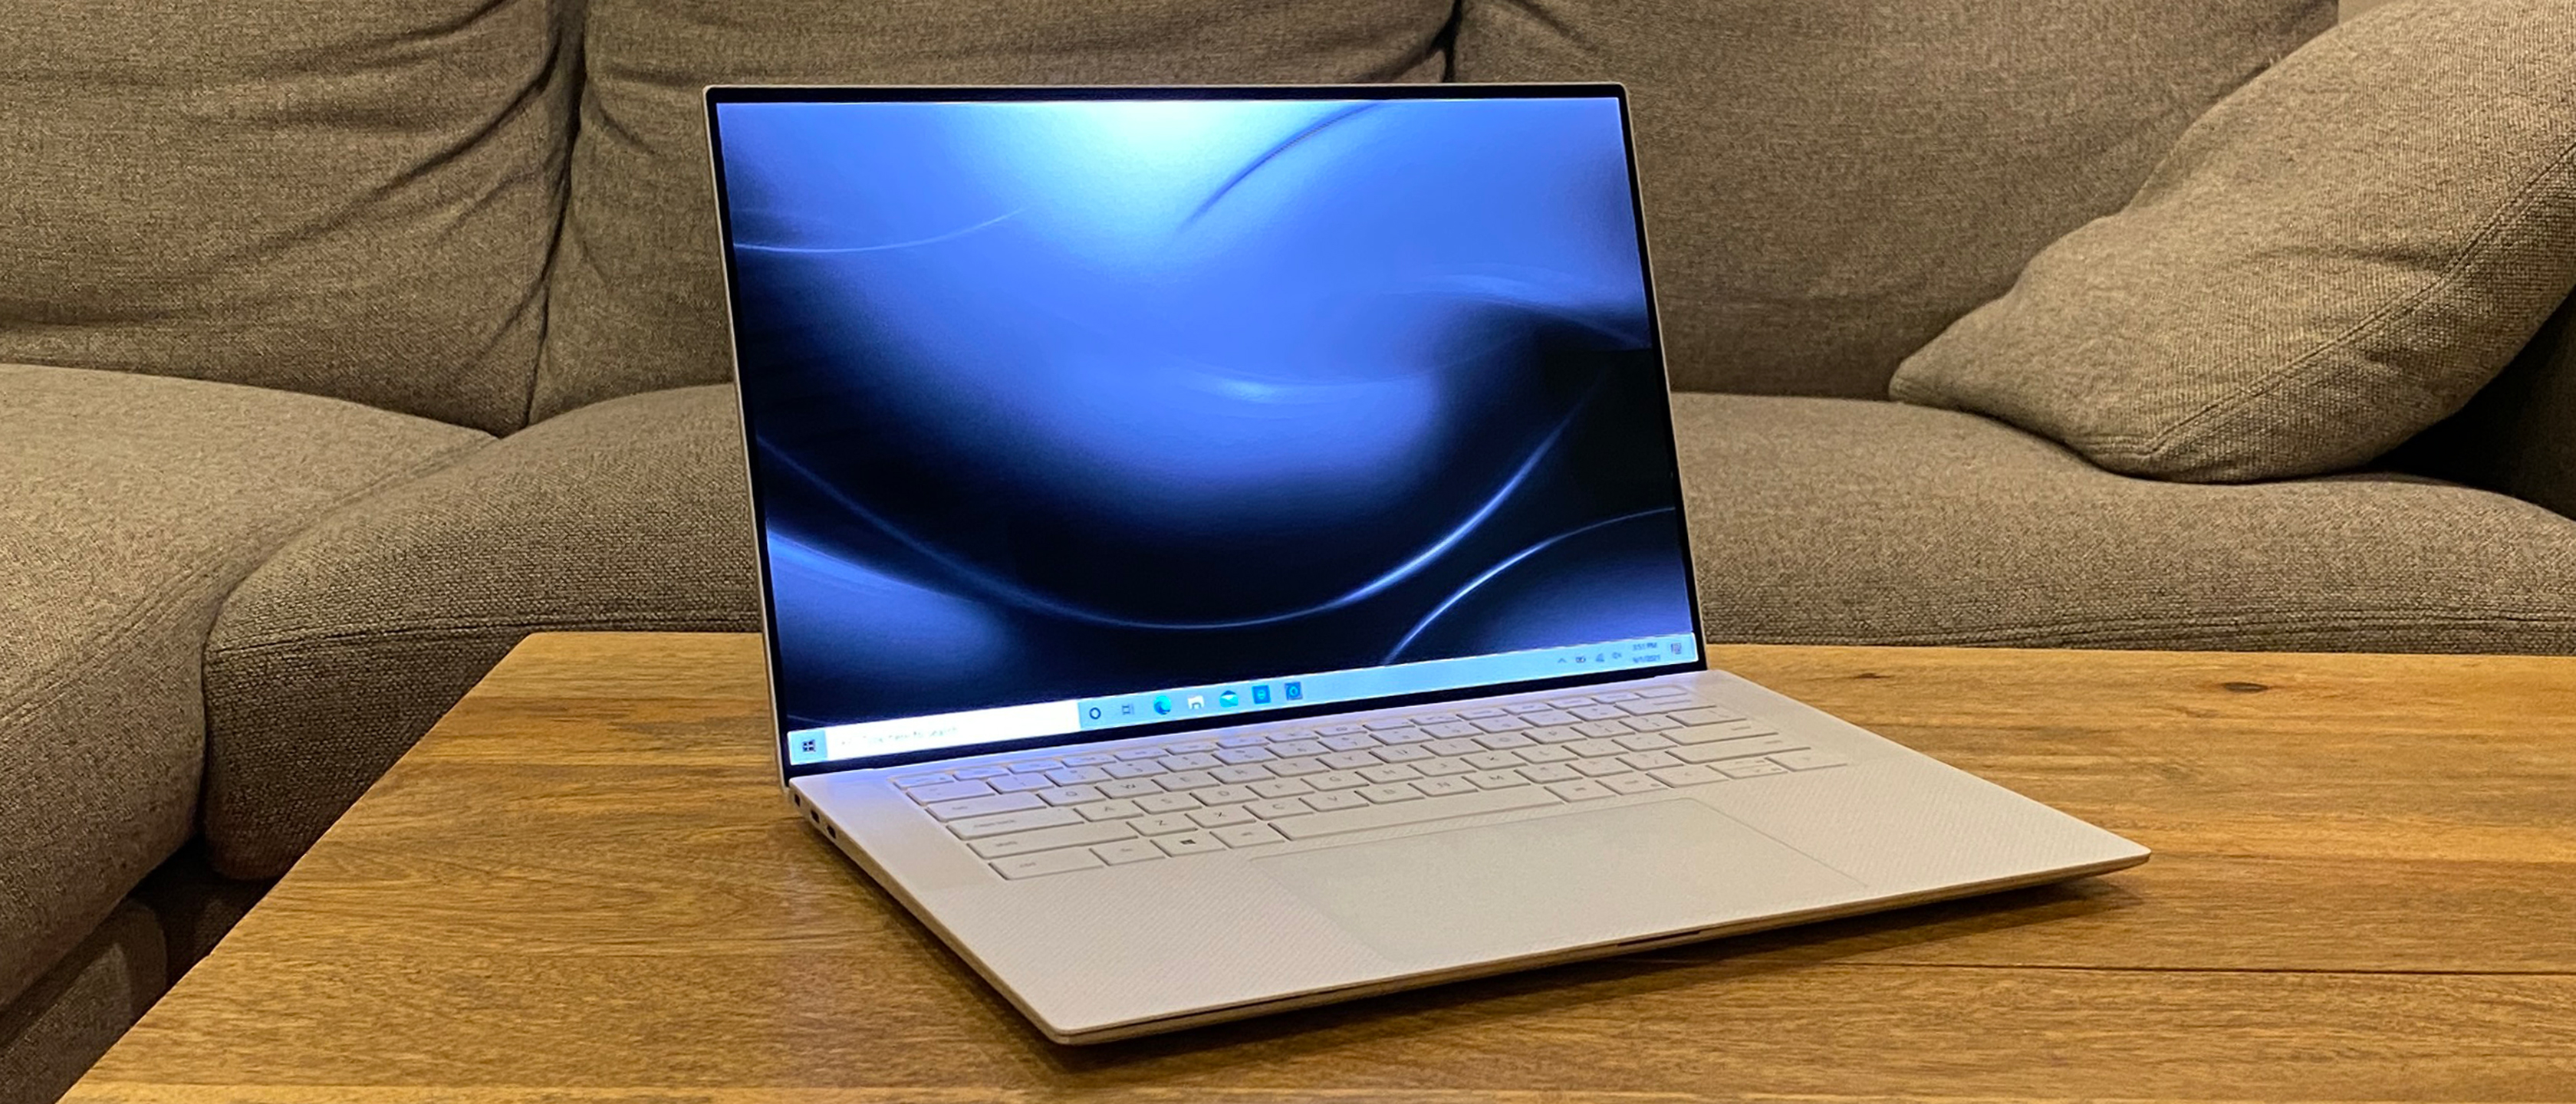 Dell xps 15 oled (2021) review: the ultimate laptop for pros